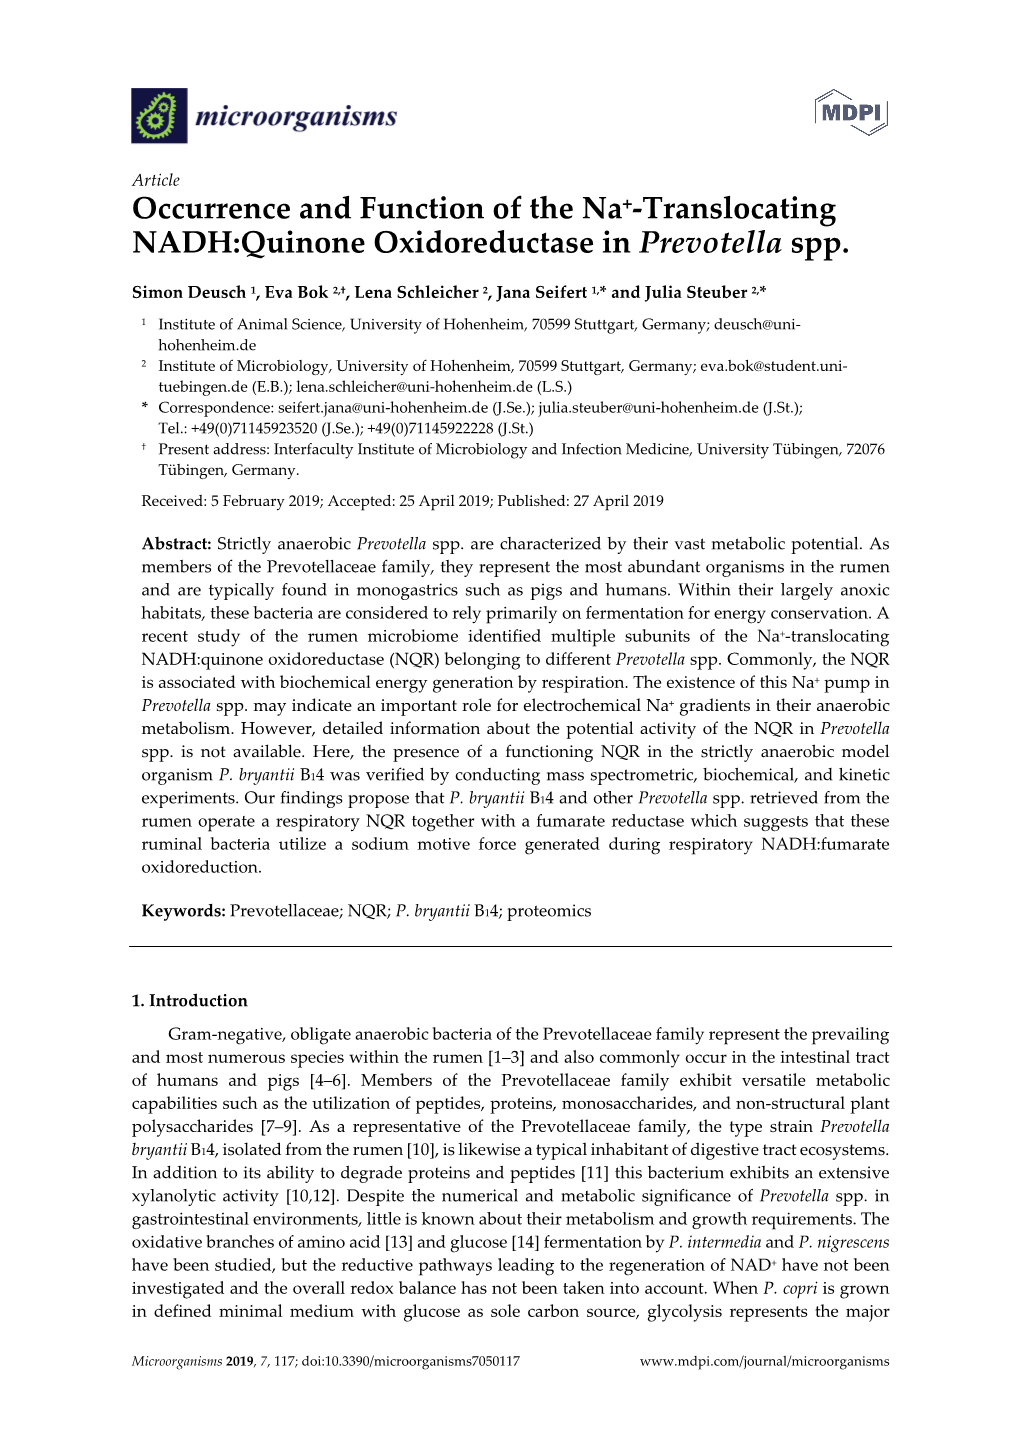 Occurrence and Function of the Na+-Translocating NADH:Quinone Oxidoreductase in Prevotella Spp